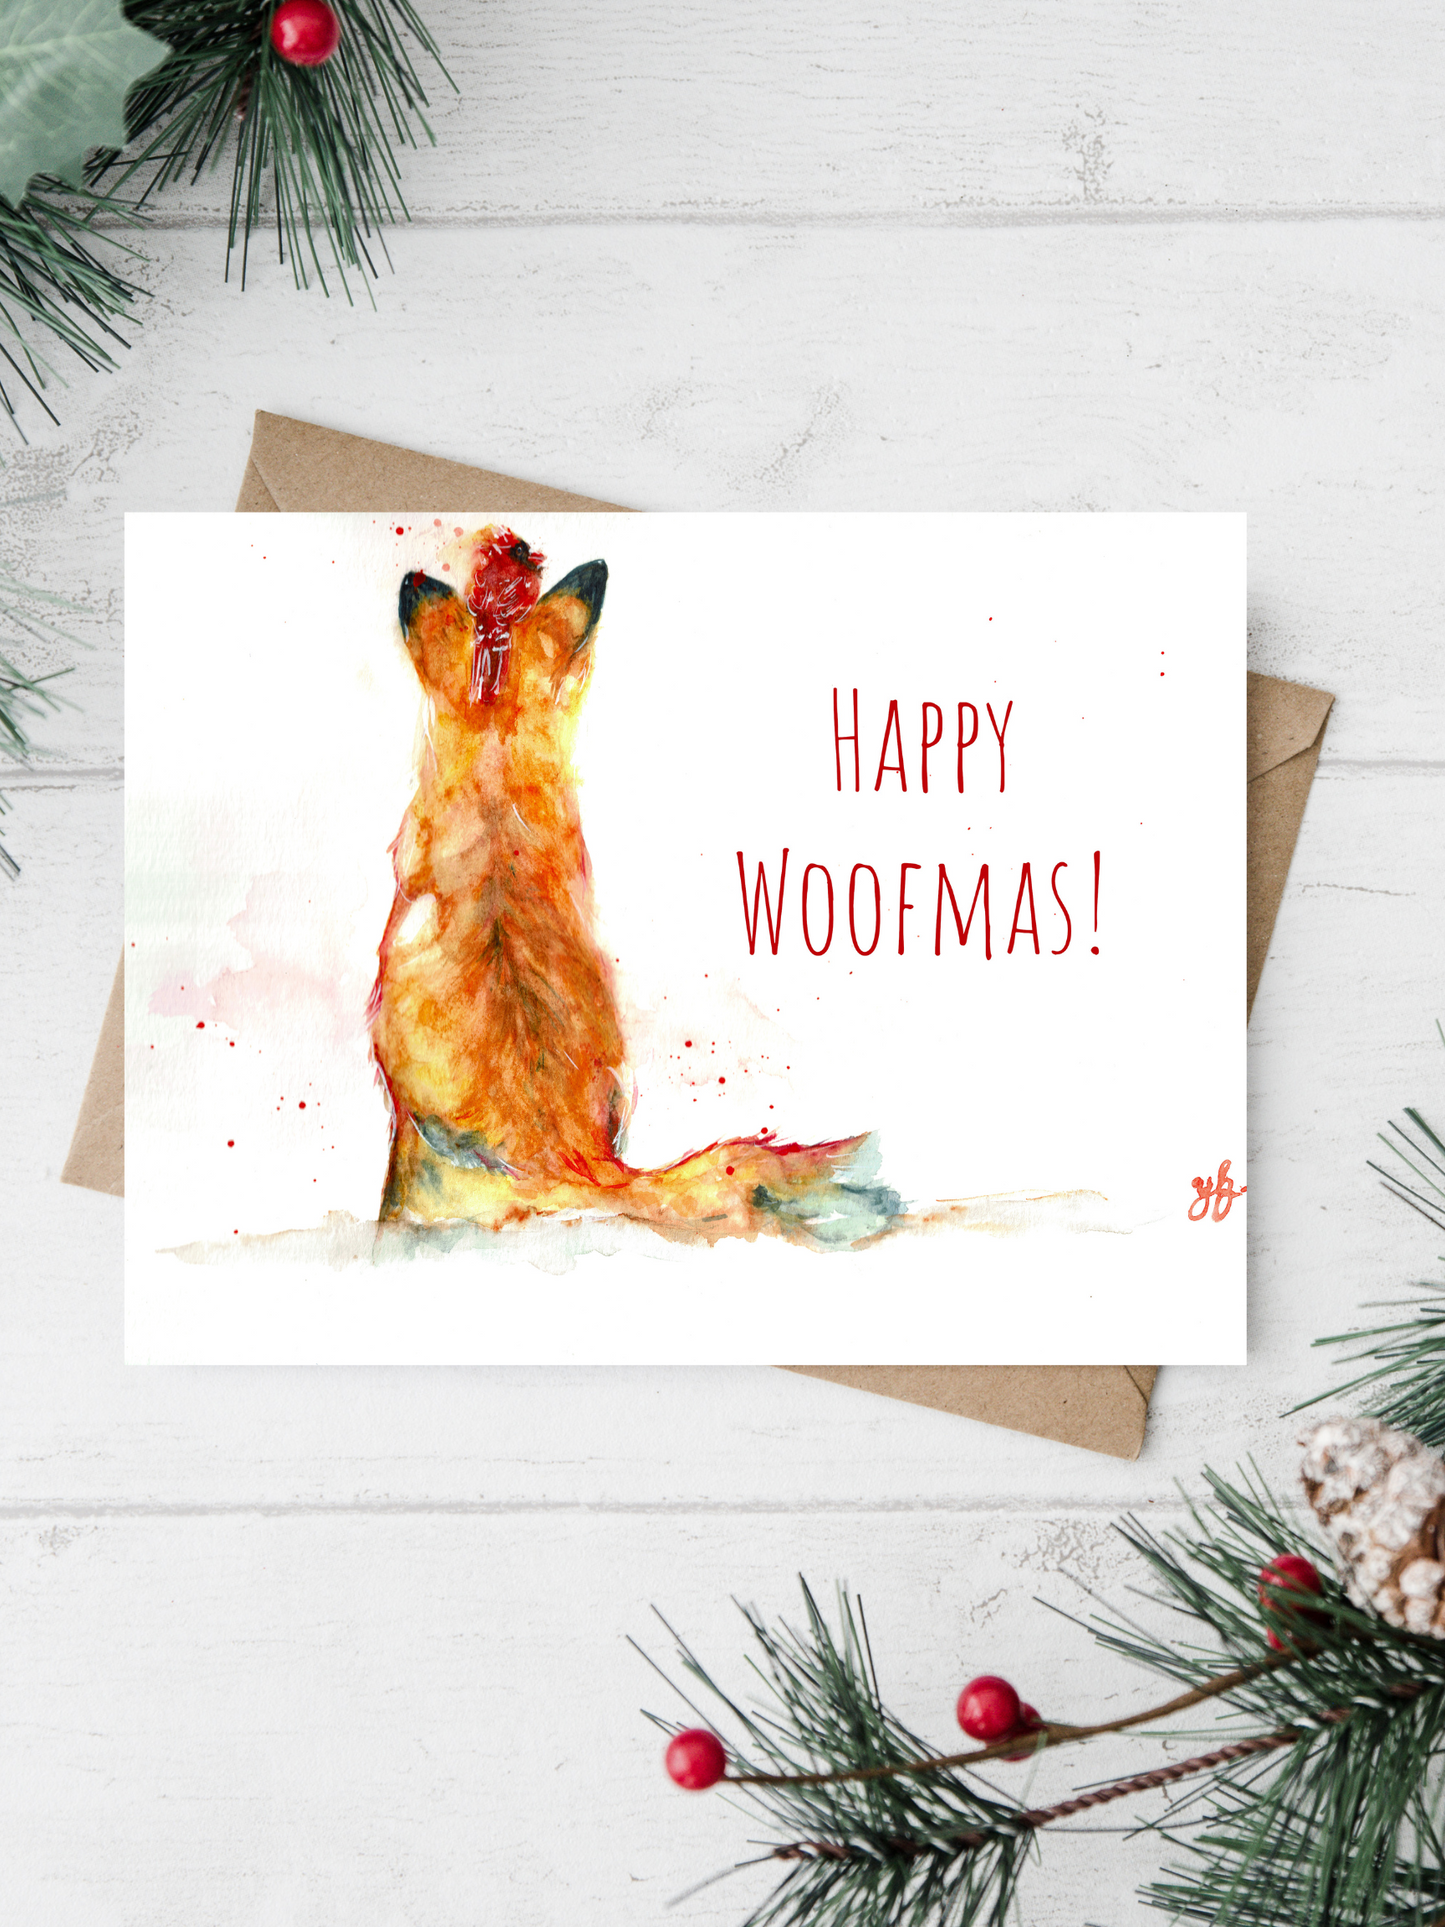 HAPPY WOOFMAS! - Essence of the art by Yui & Bow